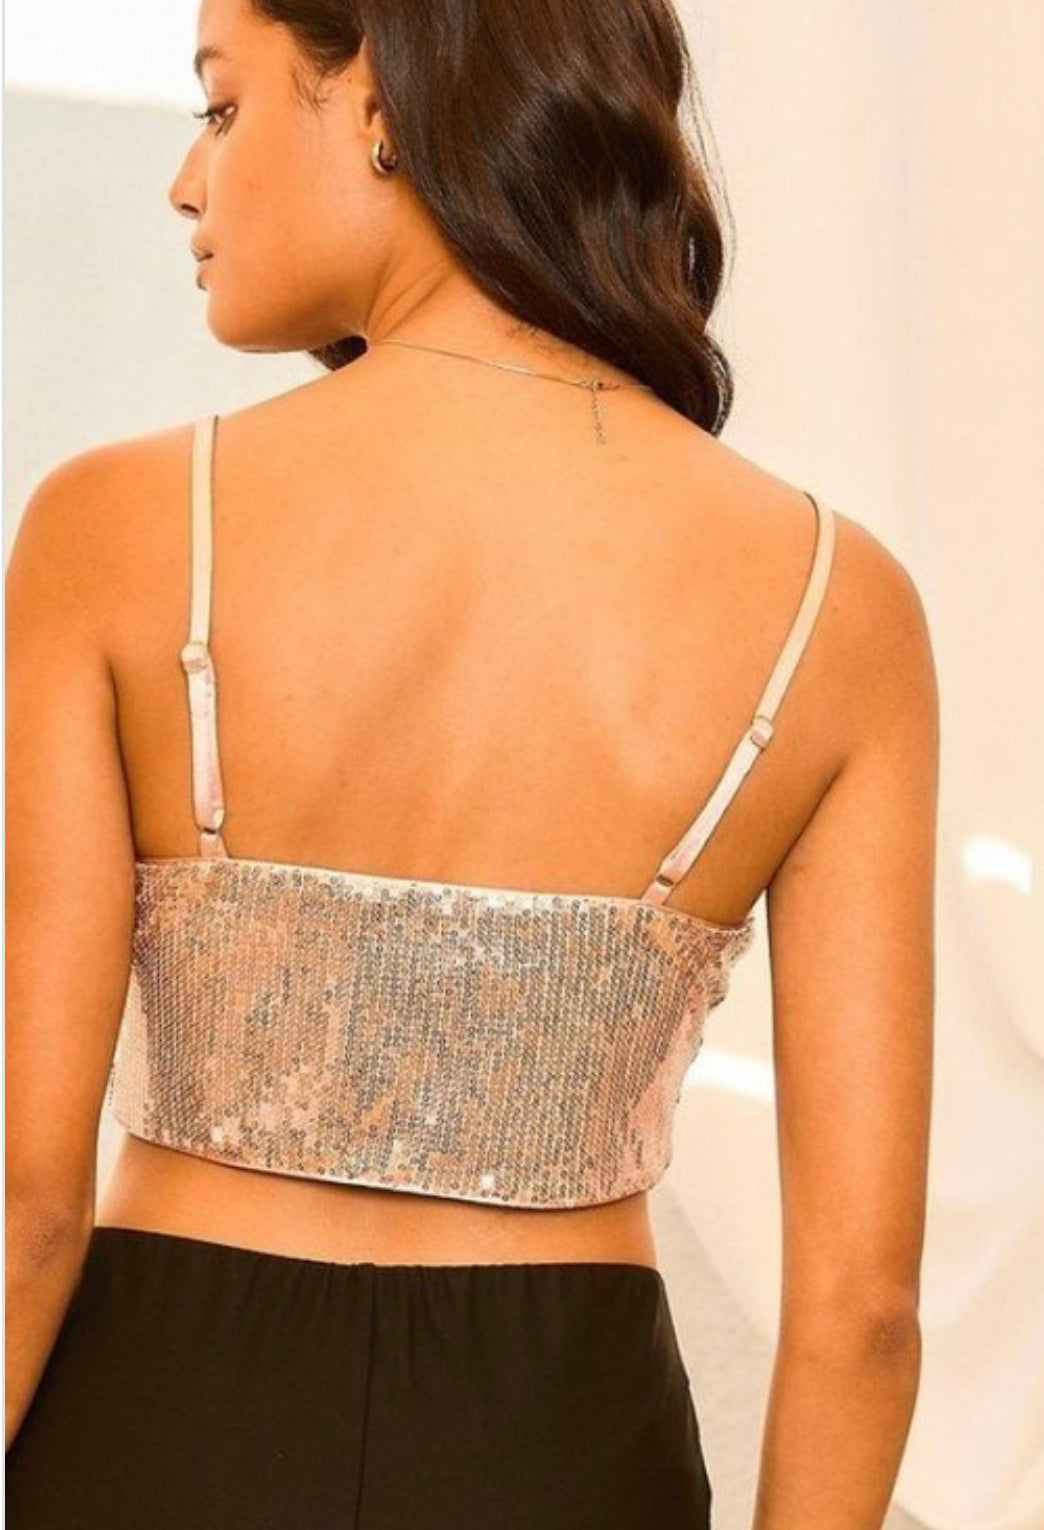 Main Strip Rose Gold Sequin Bra Top – Tammie's Bling